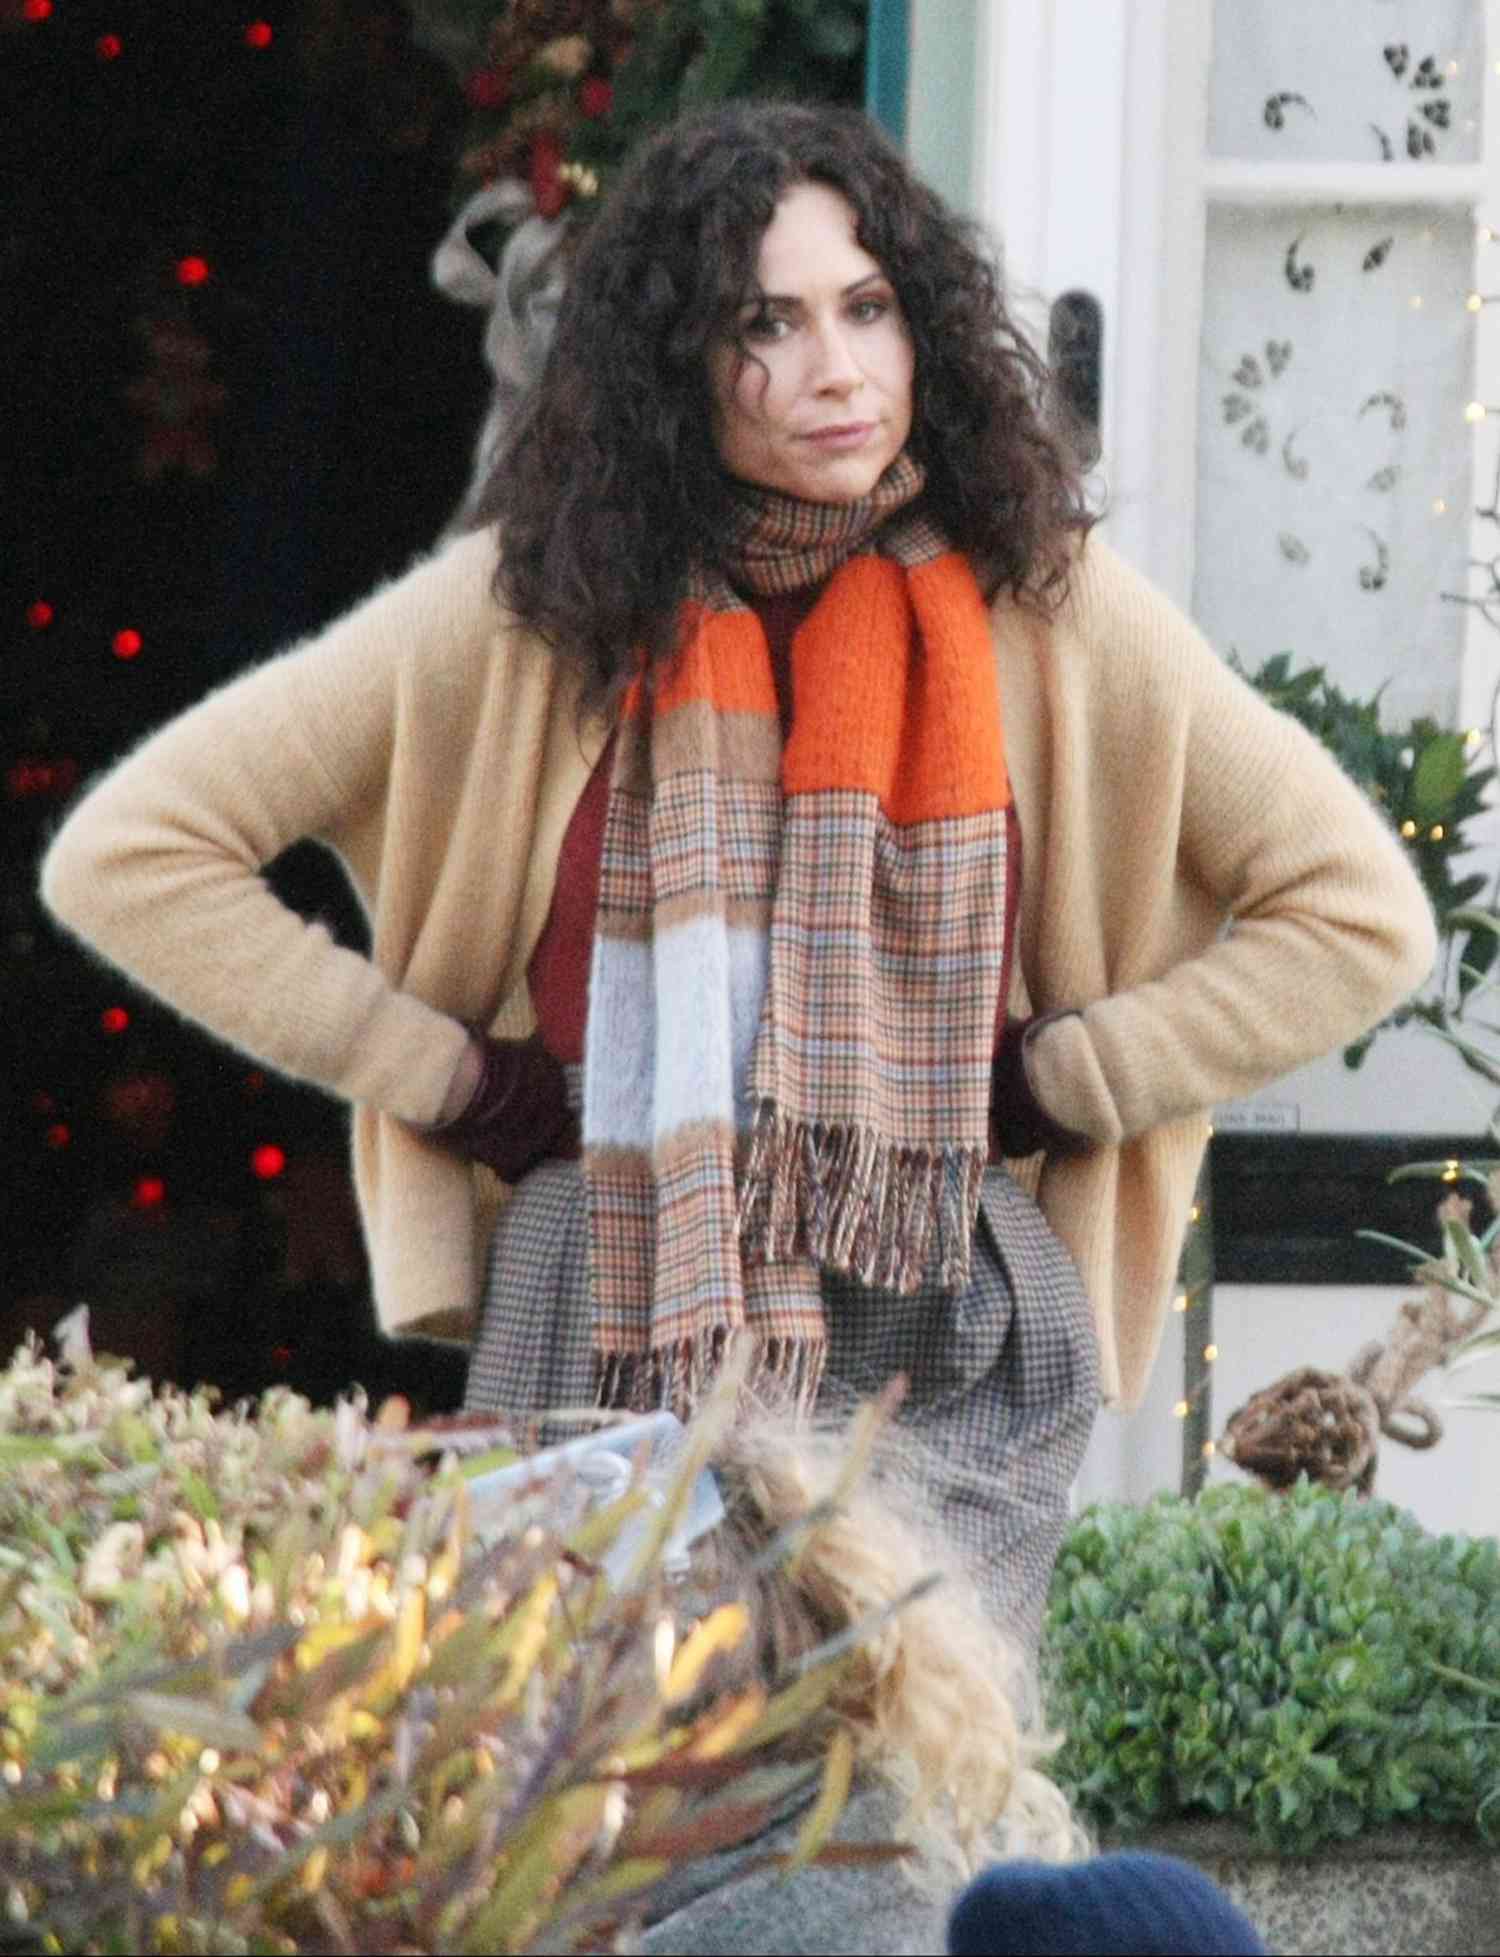 Minnie Driver On the set of Season 2 Of 'Modern Love' Filming In Bray, Co. Wicklow, Ireland